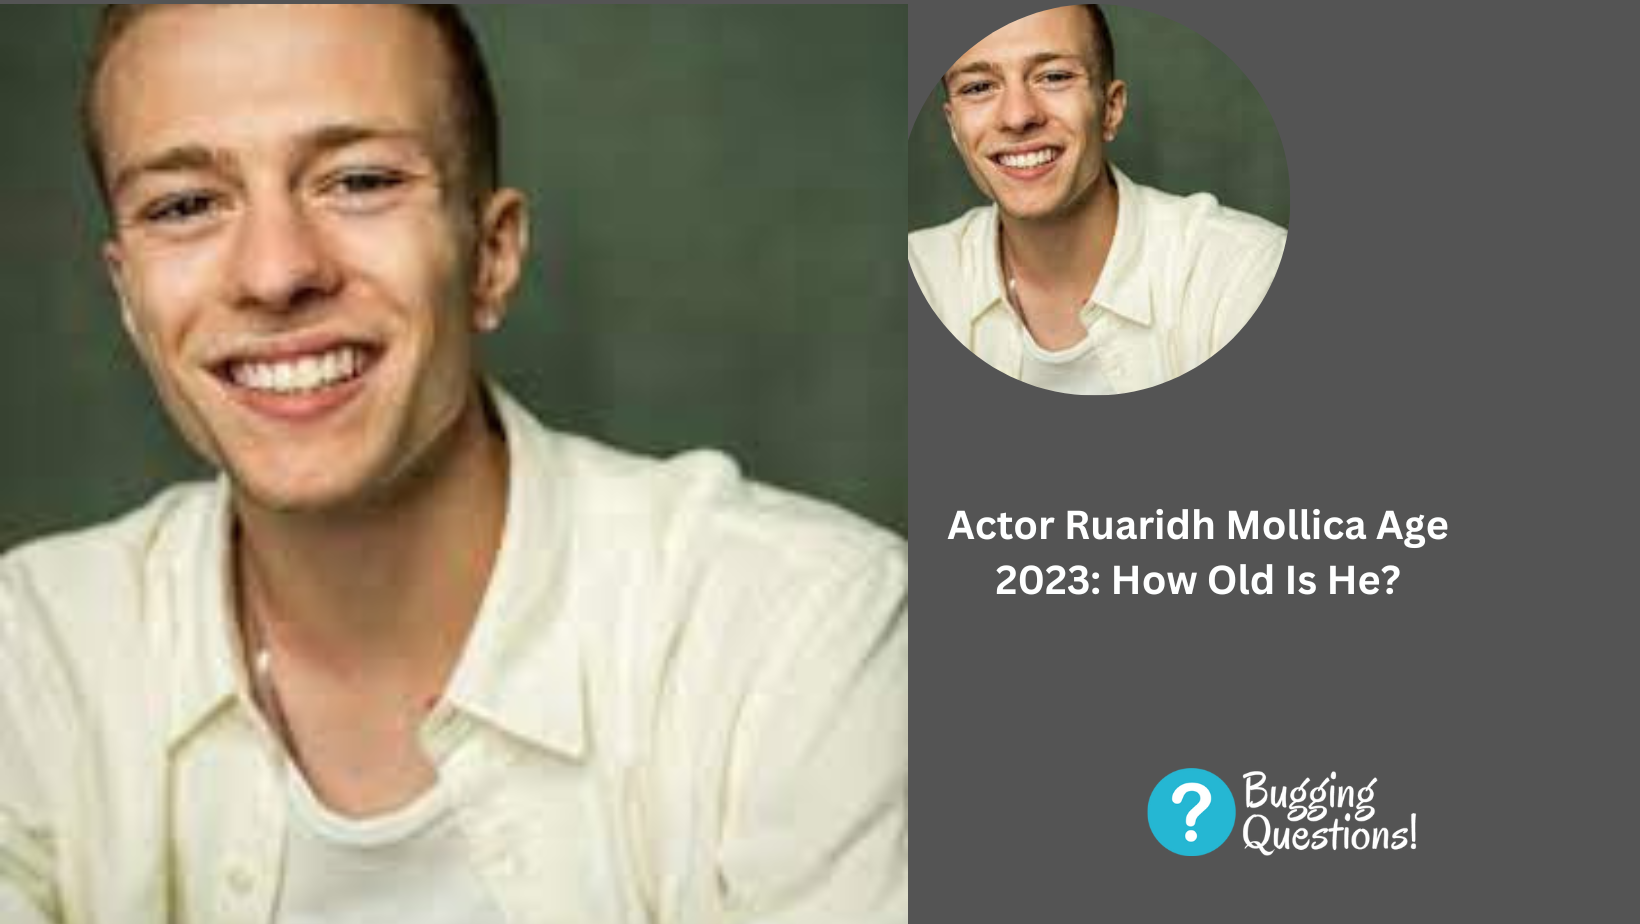 Actor Ruaridh Mollica Age 2023: How Old Is He?